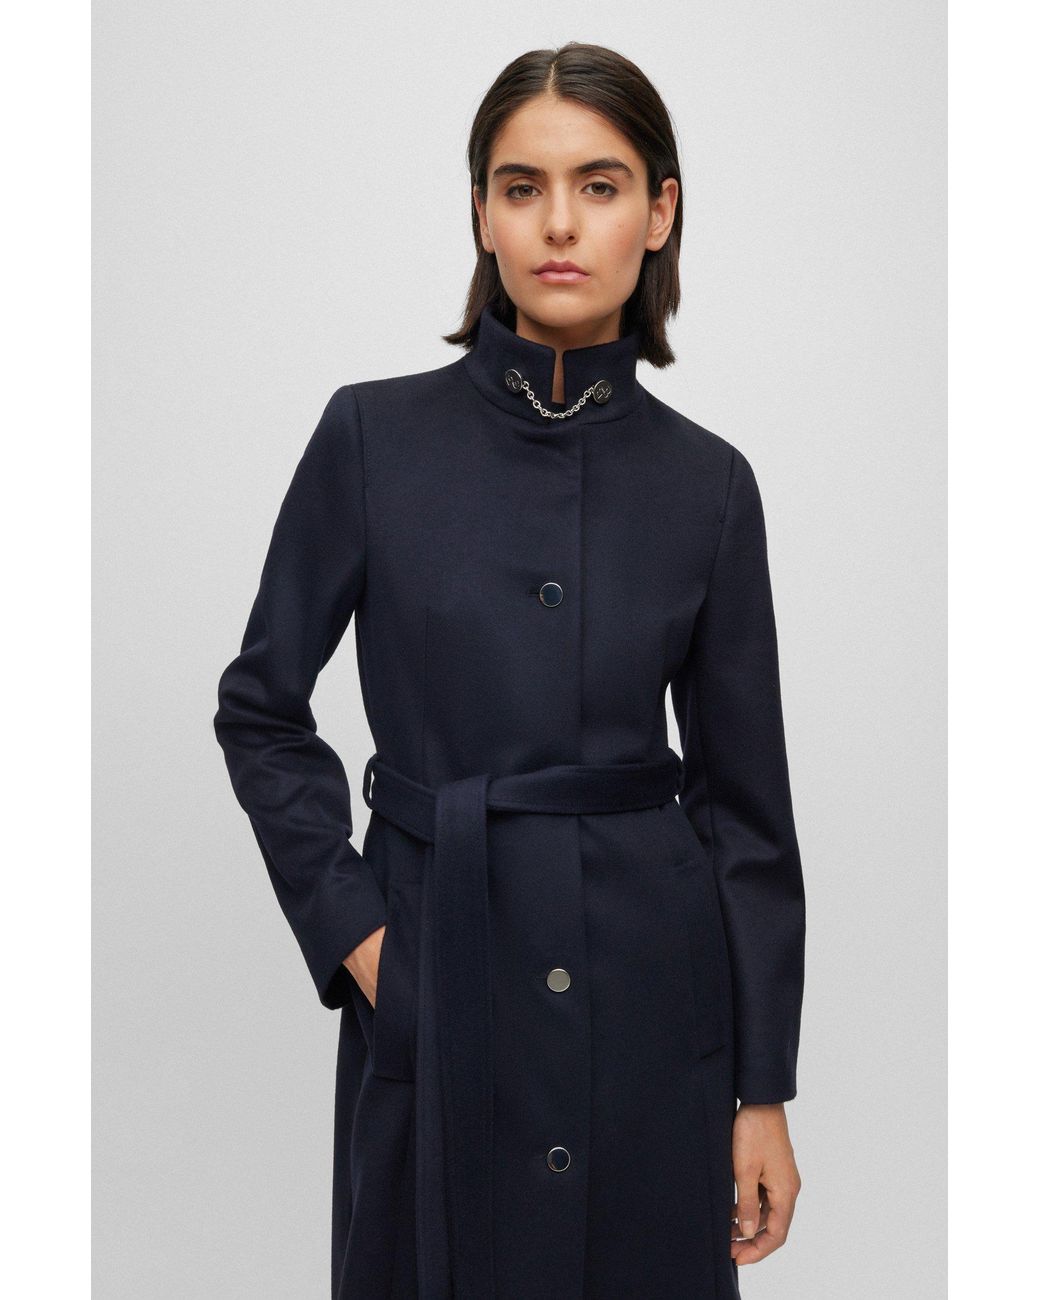 BOSS by HUGO BOSS Belted Coat In Virgin Wool And Cashmere in Black | Lyst UK